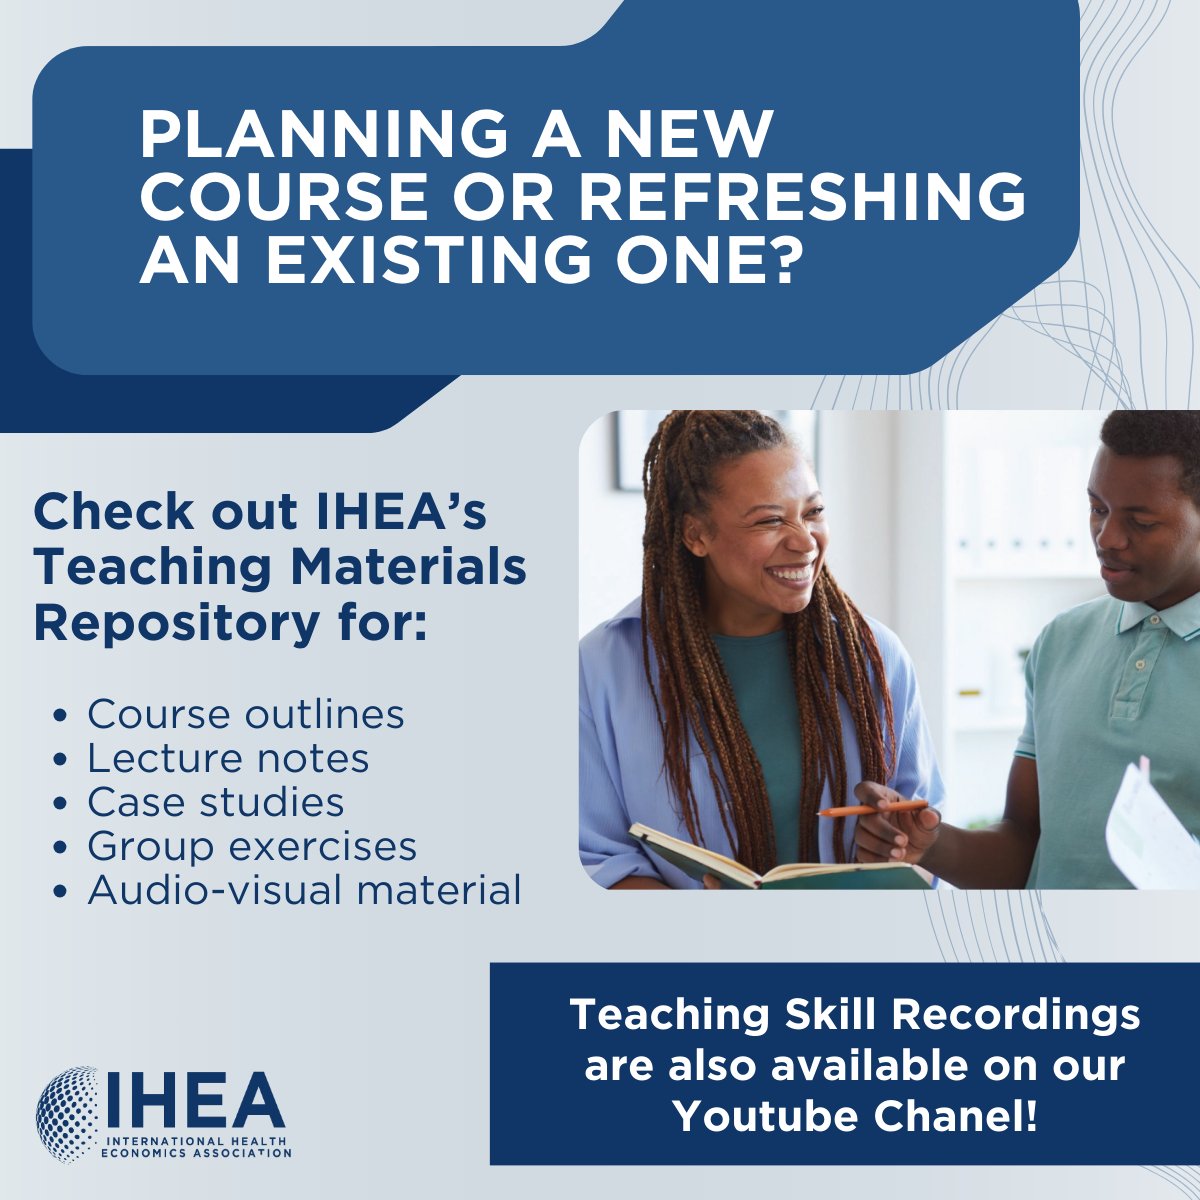 🌍Planning a course? Visit the IHEA Teaching Repository to gain access to course outlines and other teaching materials or contribute your own to help enhance future courses! Plus, don't miss IHEA's Teaching Skill Workshop videos on YouTube. Explore now: healtheconomics.org/teaching-mater…